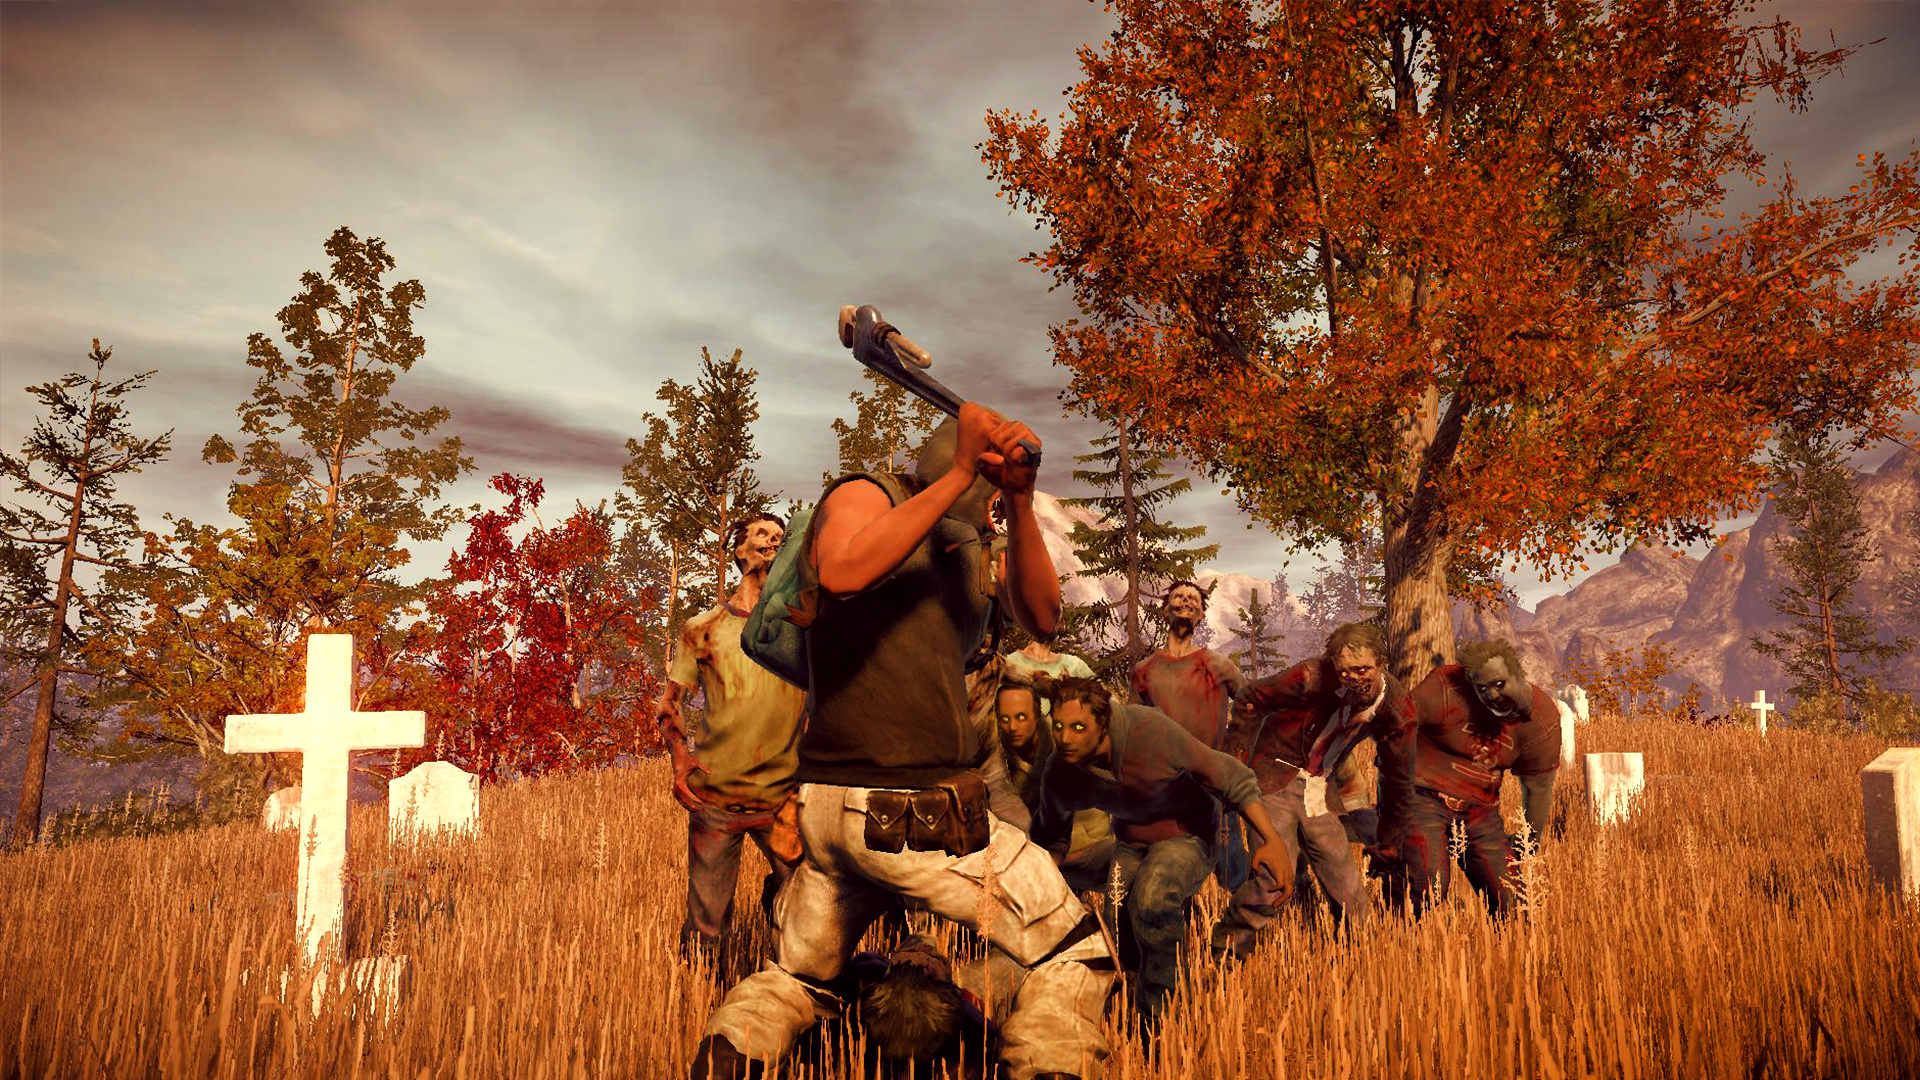 state of decay one year survival edition